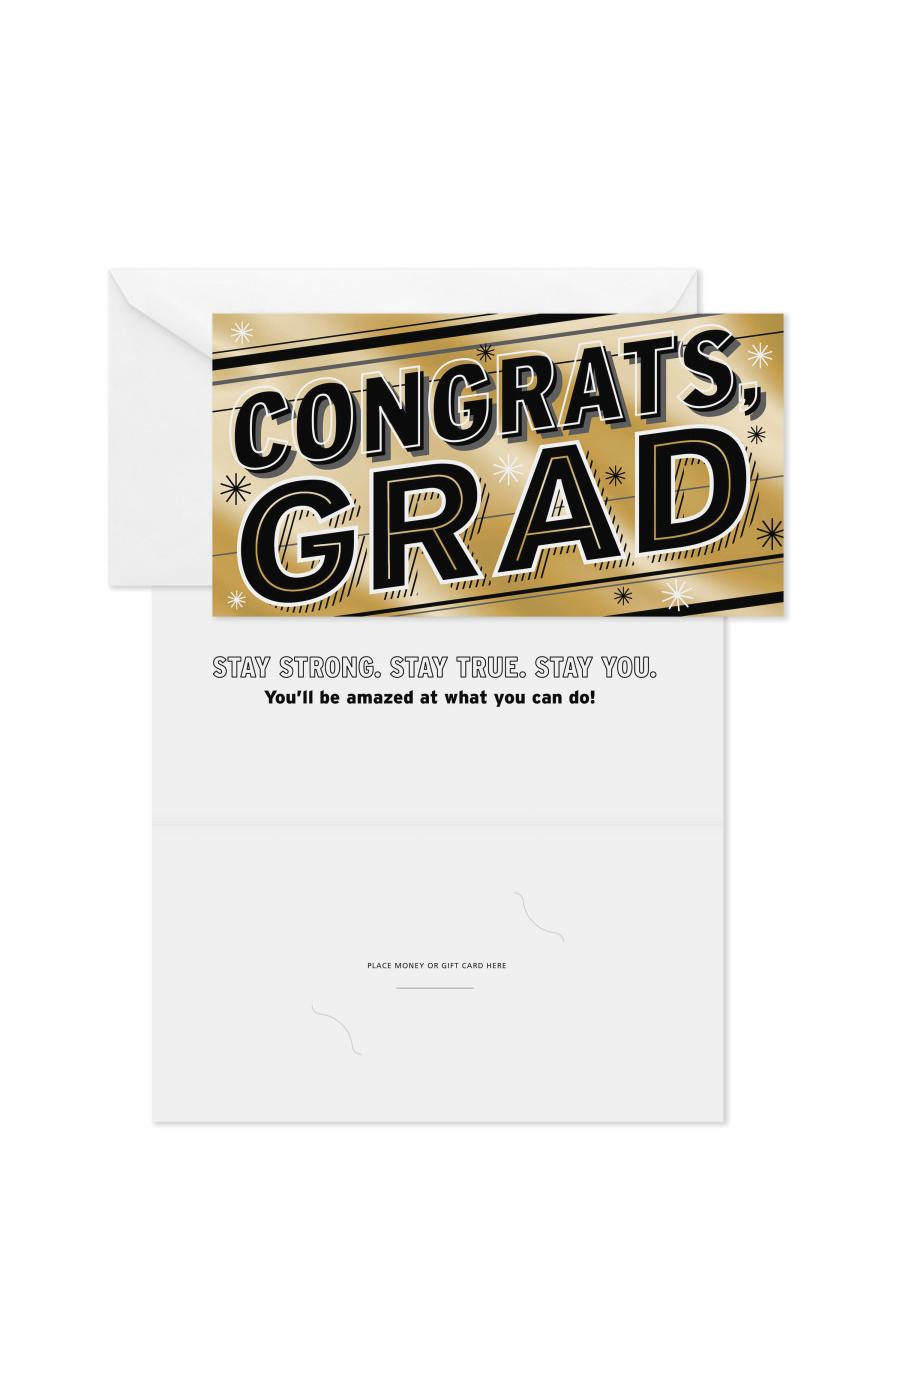 Hallmark Gold Foil Congrats Grad Money Holders or Gift Card Holders with Envelopes - S31, S16; image 5 of 6